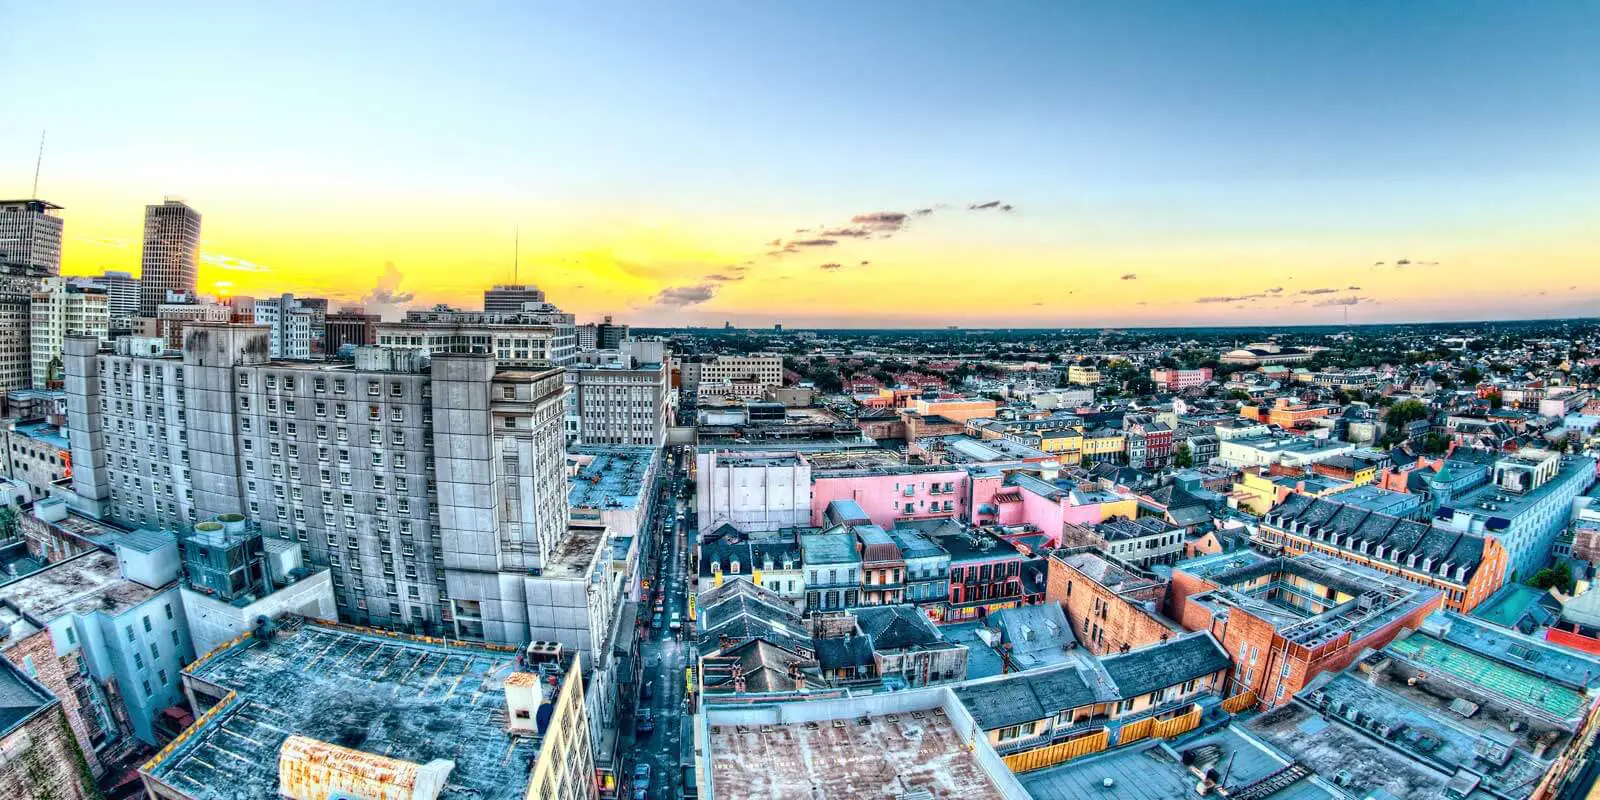 Rooftop views of New Orleans from Hotel Monteleone